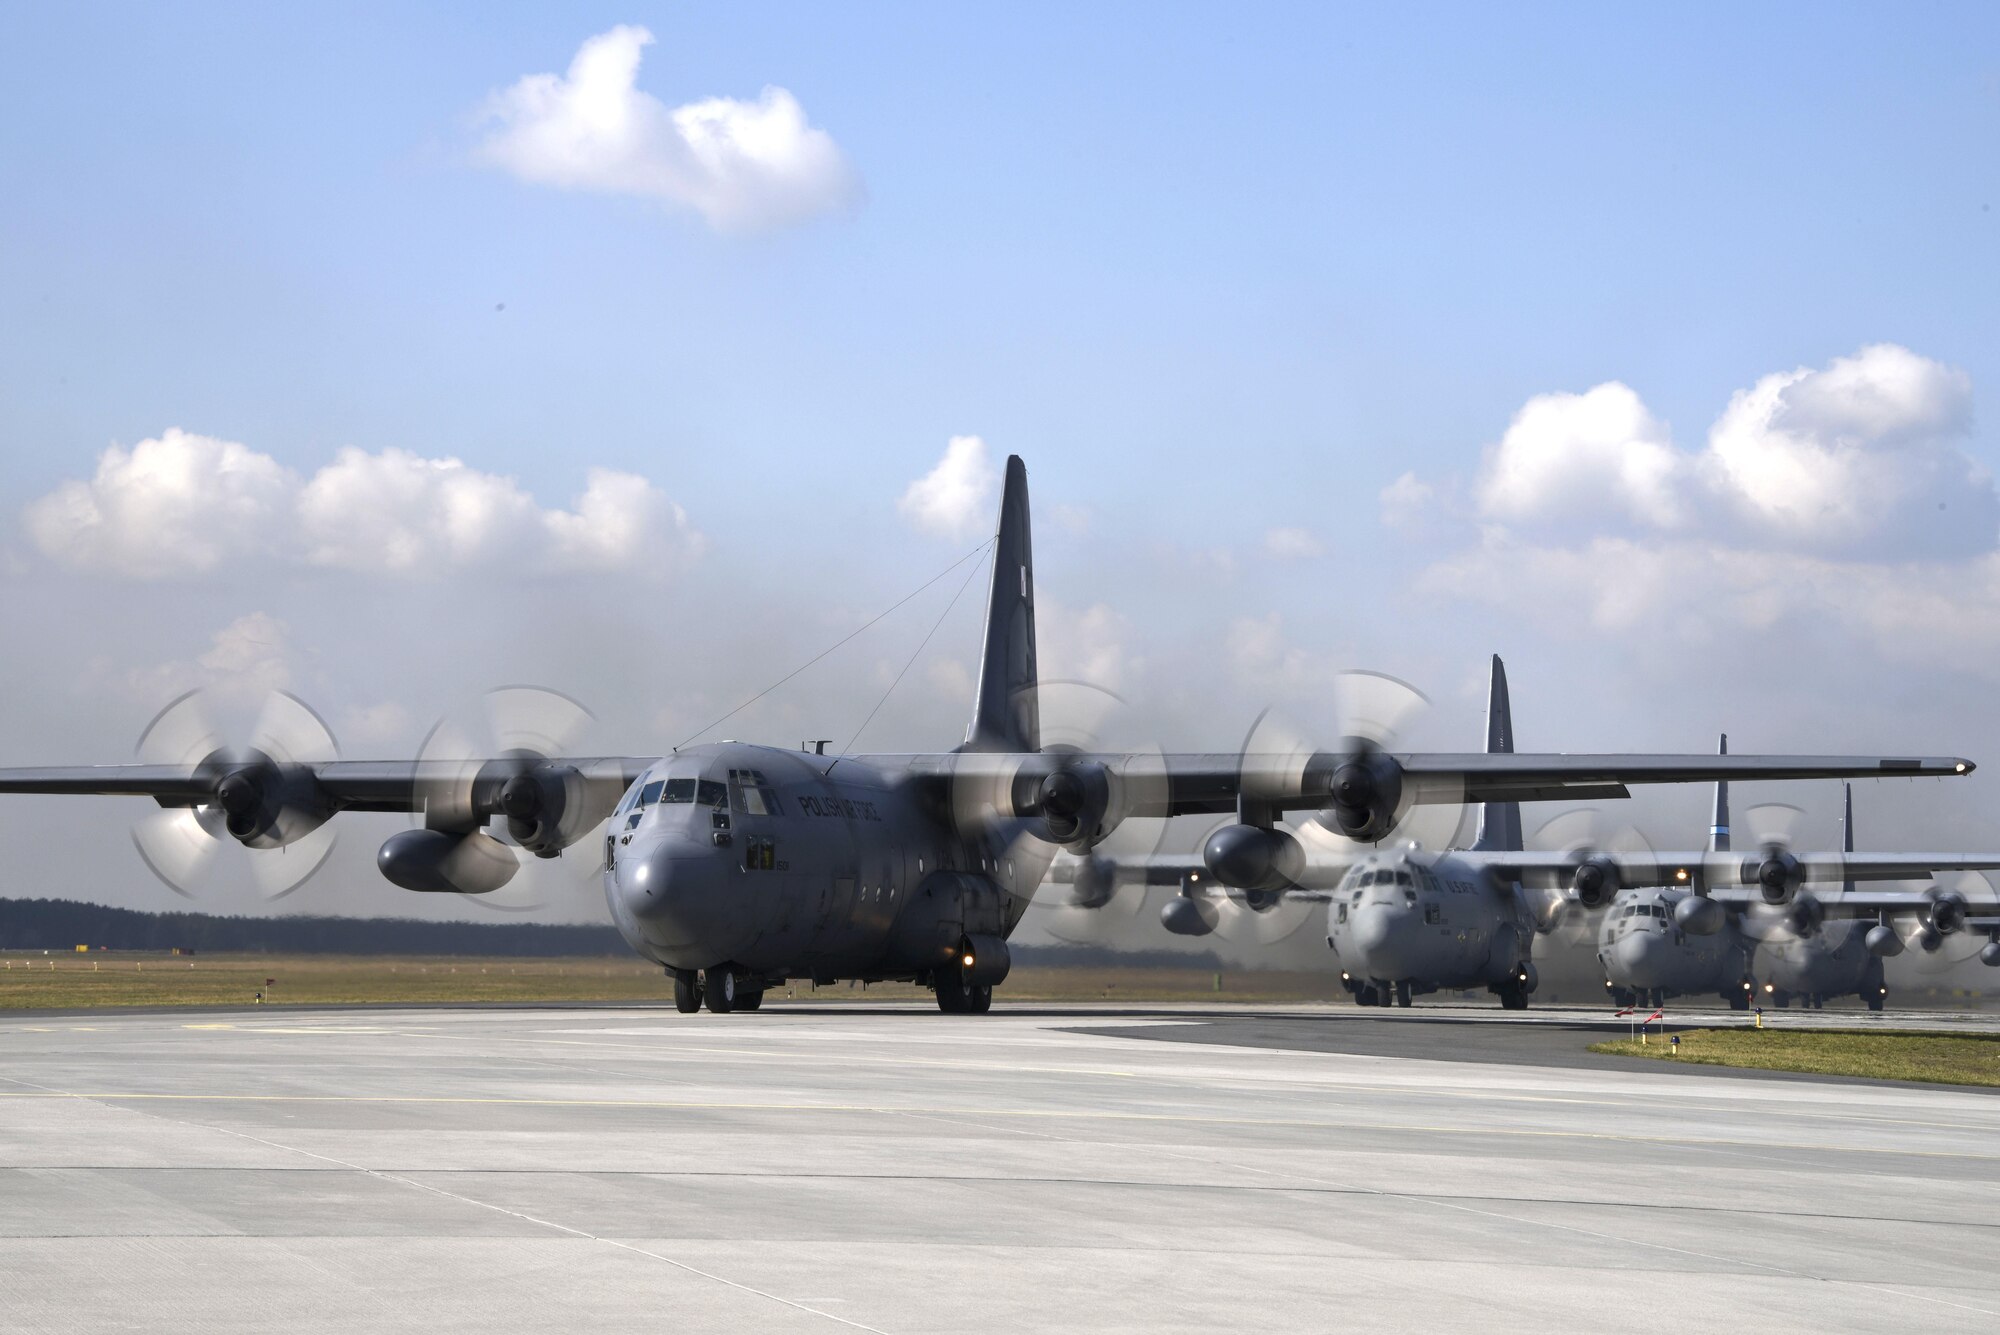 U.S. and Polish C-130 Hercules aircraft prepare to fly a 4-ship formation at Powidz Air Base, Poland, March 24, 2017.  Airmen from both countries participated in bilateral training during Aviation Detachment 17-2 in support of Operation Atlantic Resolve.  These bilateral trainings focused on maintaining joint readiness while building interoperability.  (Air National Guard photo by Staff Sgt. Alonzo Chapman/Released).